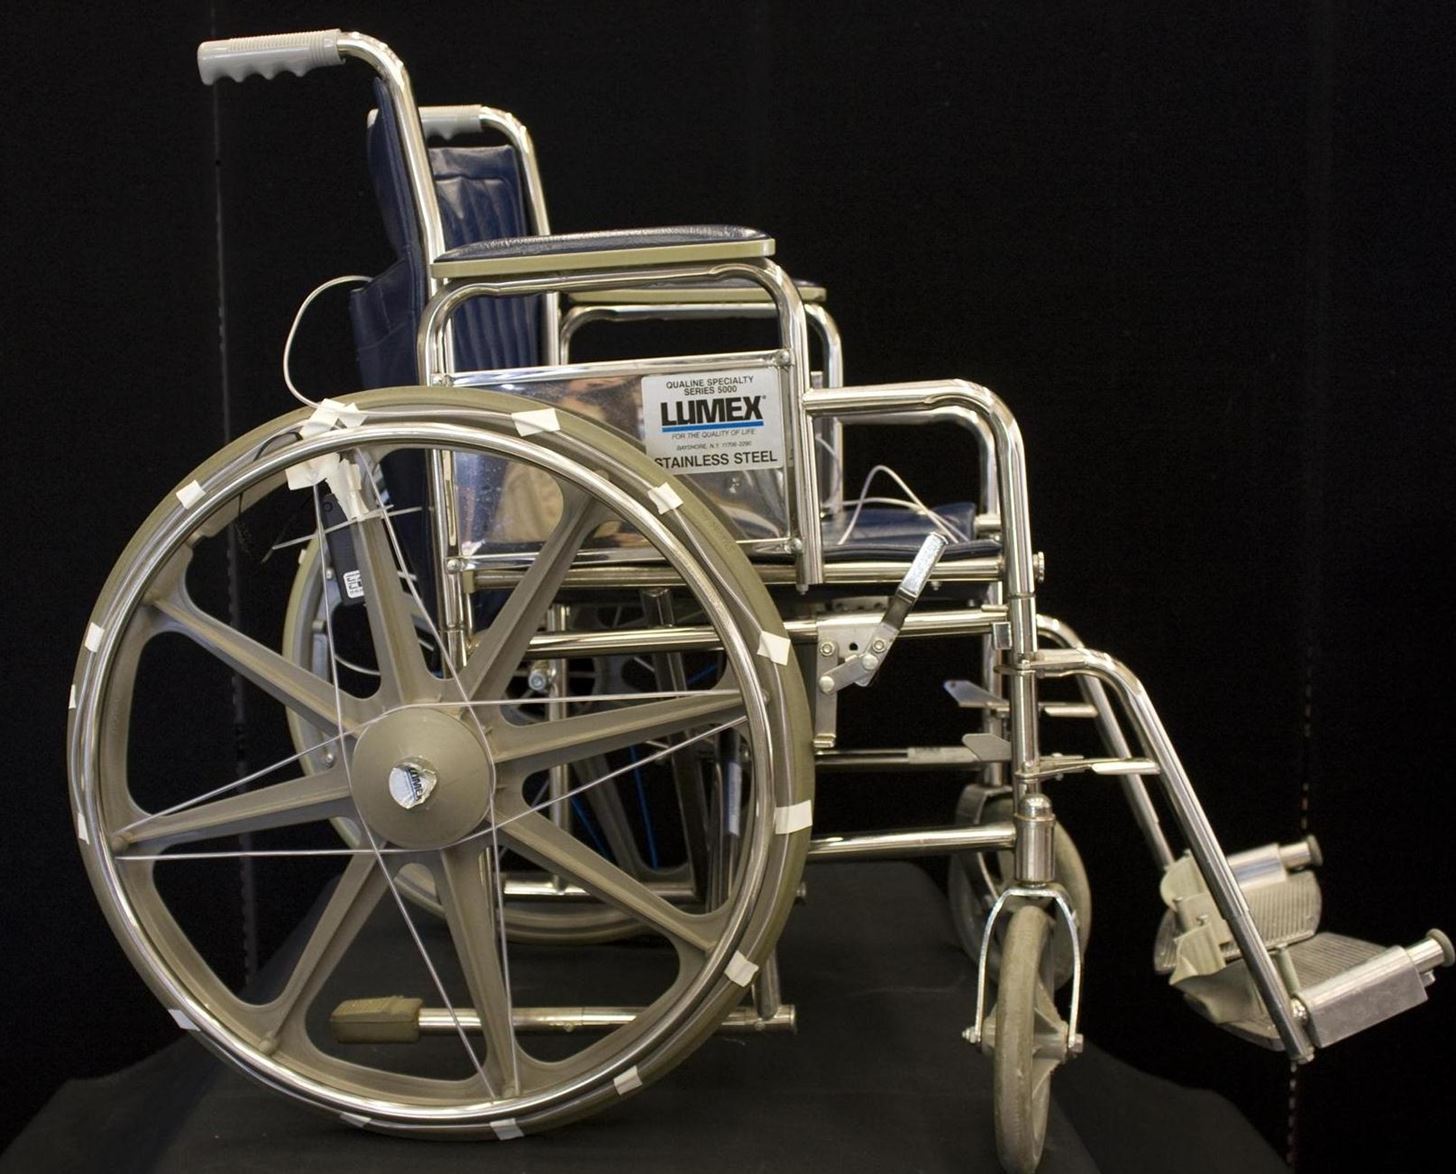 How to Illuminate a Wheelchair for Safety Using EL Wire & LED Strip